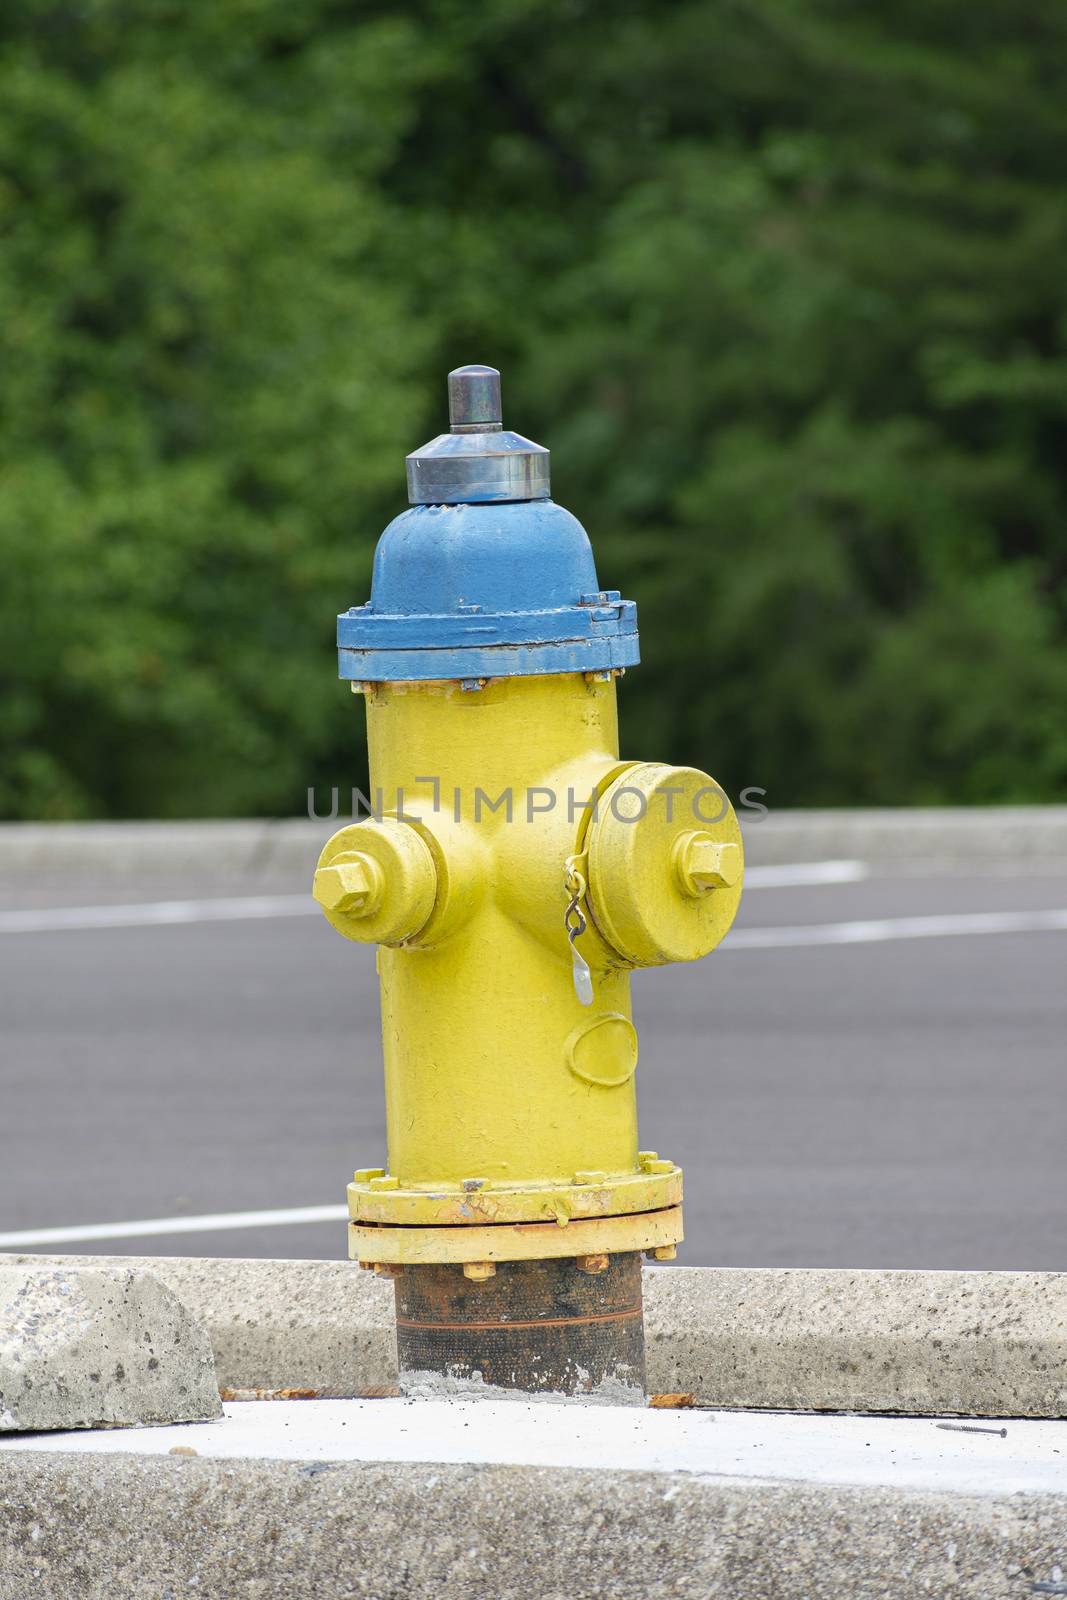 Old Yellow Fire Hydrant With Copy Space by stockbuster1